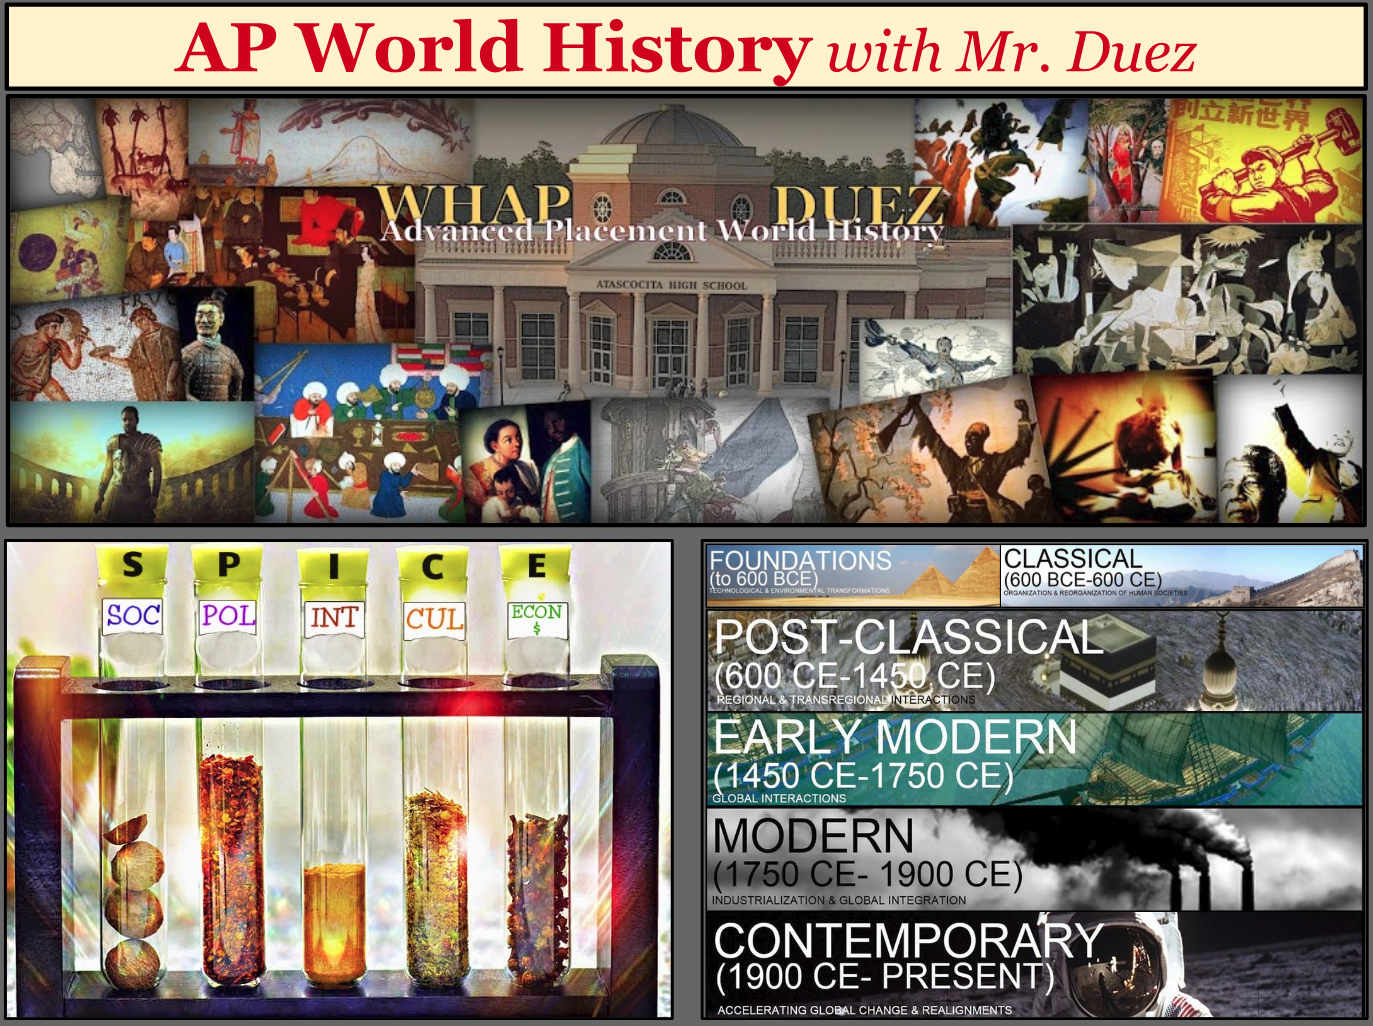 World History Advanced Placement with Mr. Duez: When & How Can I